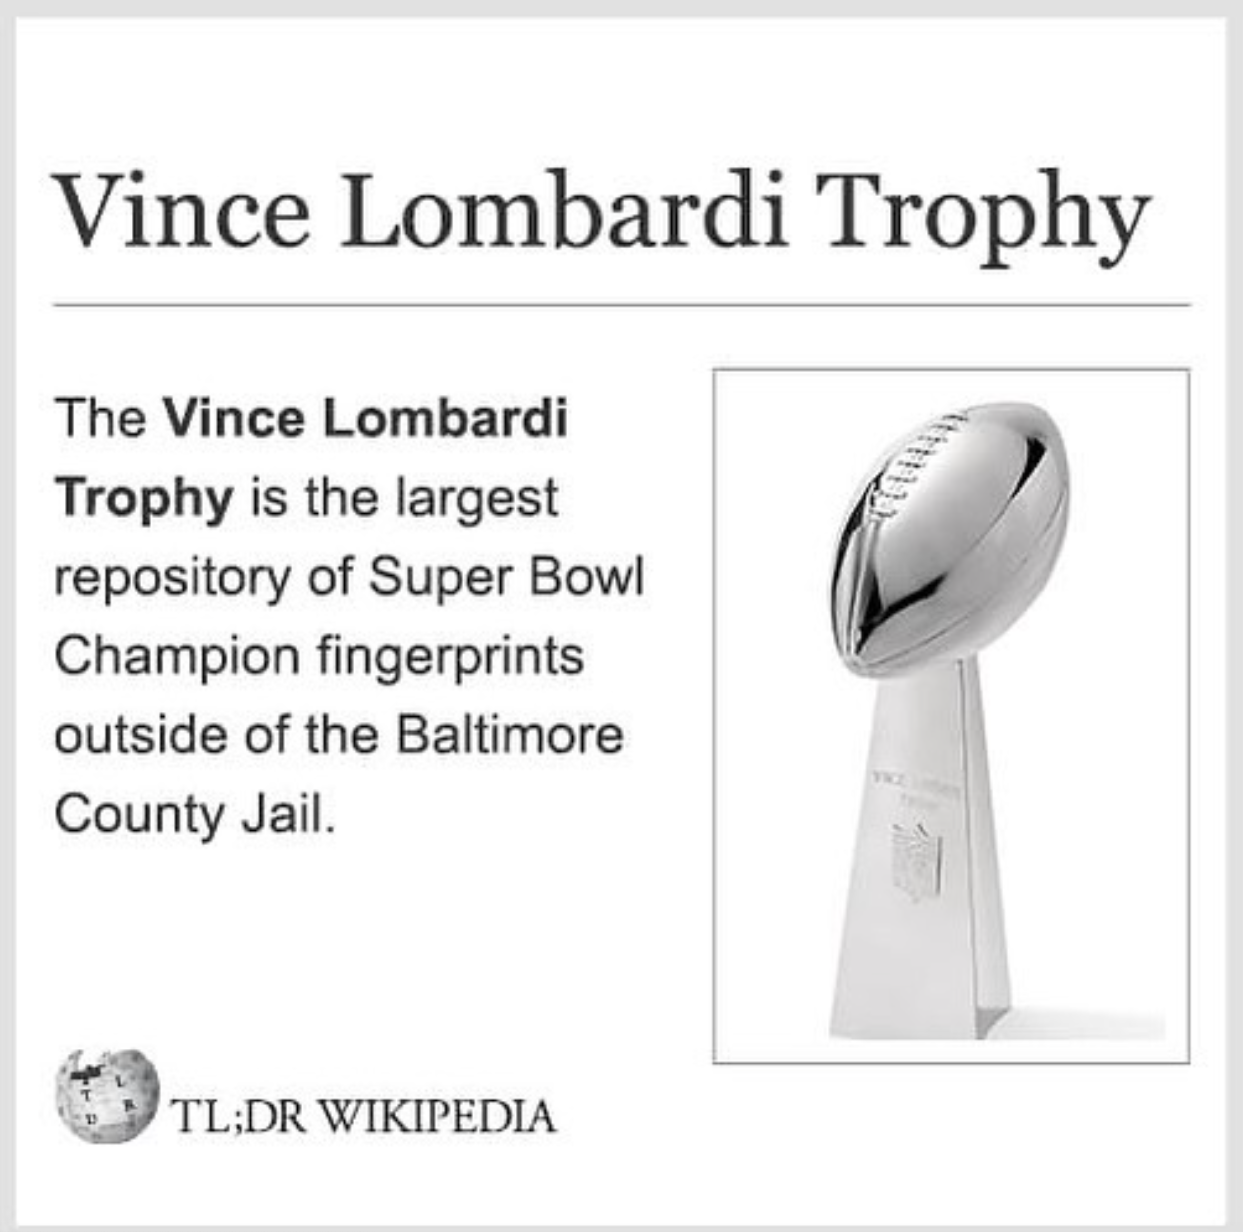 Wikipedia Memes - output device - Vince Lombardi Trophy The Vince Lombardi Trophy is the largest repository of Super Bowl Champion fingerprints outside of the Baltimore County Jail. Tl;Dr Wikipedia